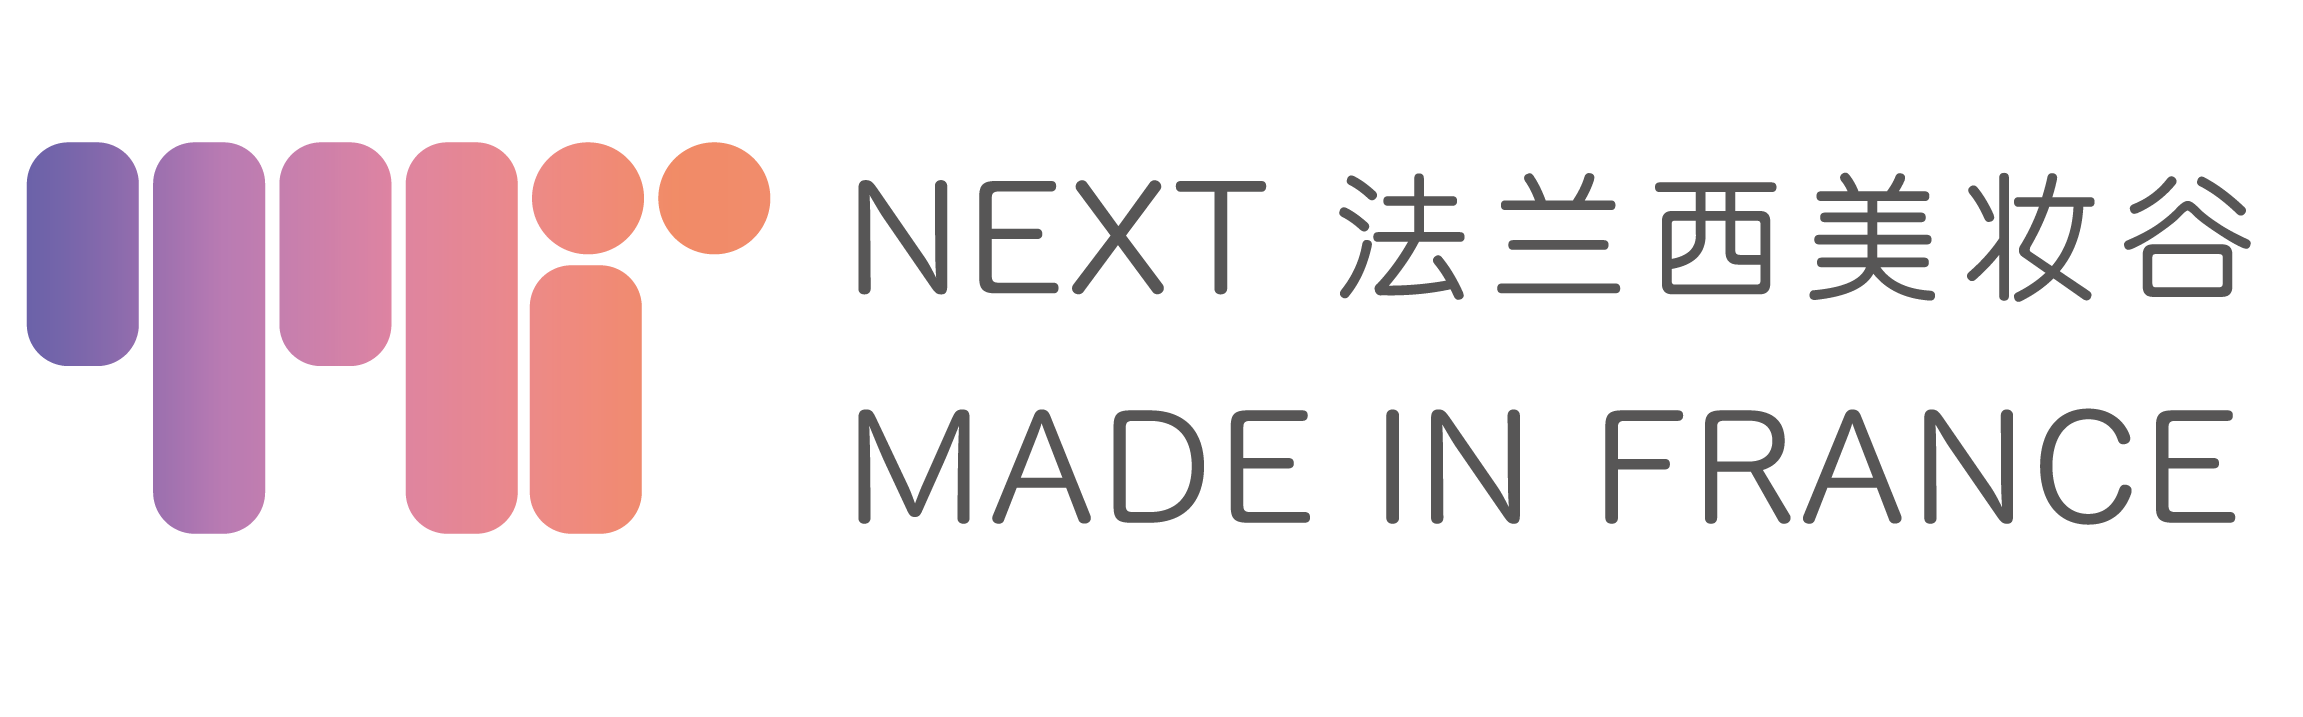 NEXT MADE IN FRANCE